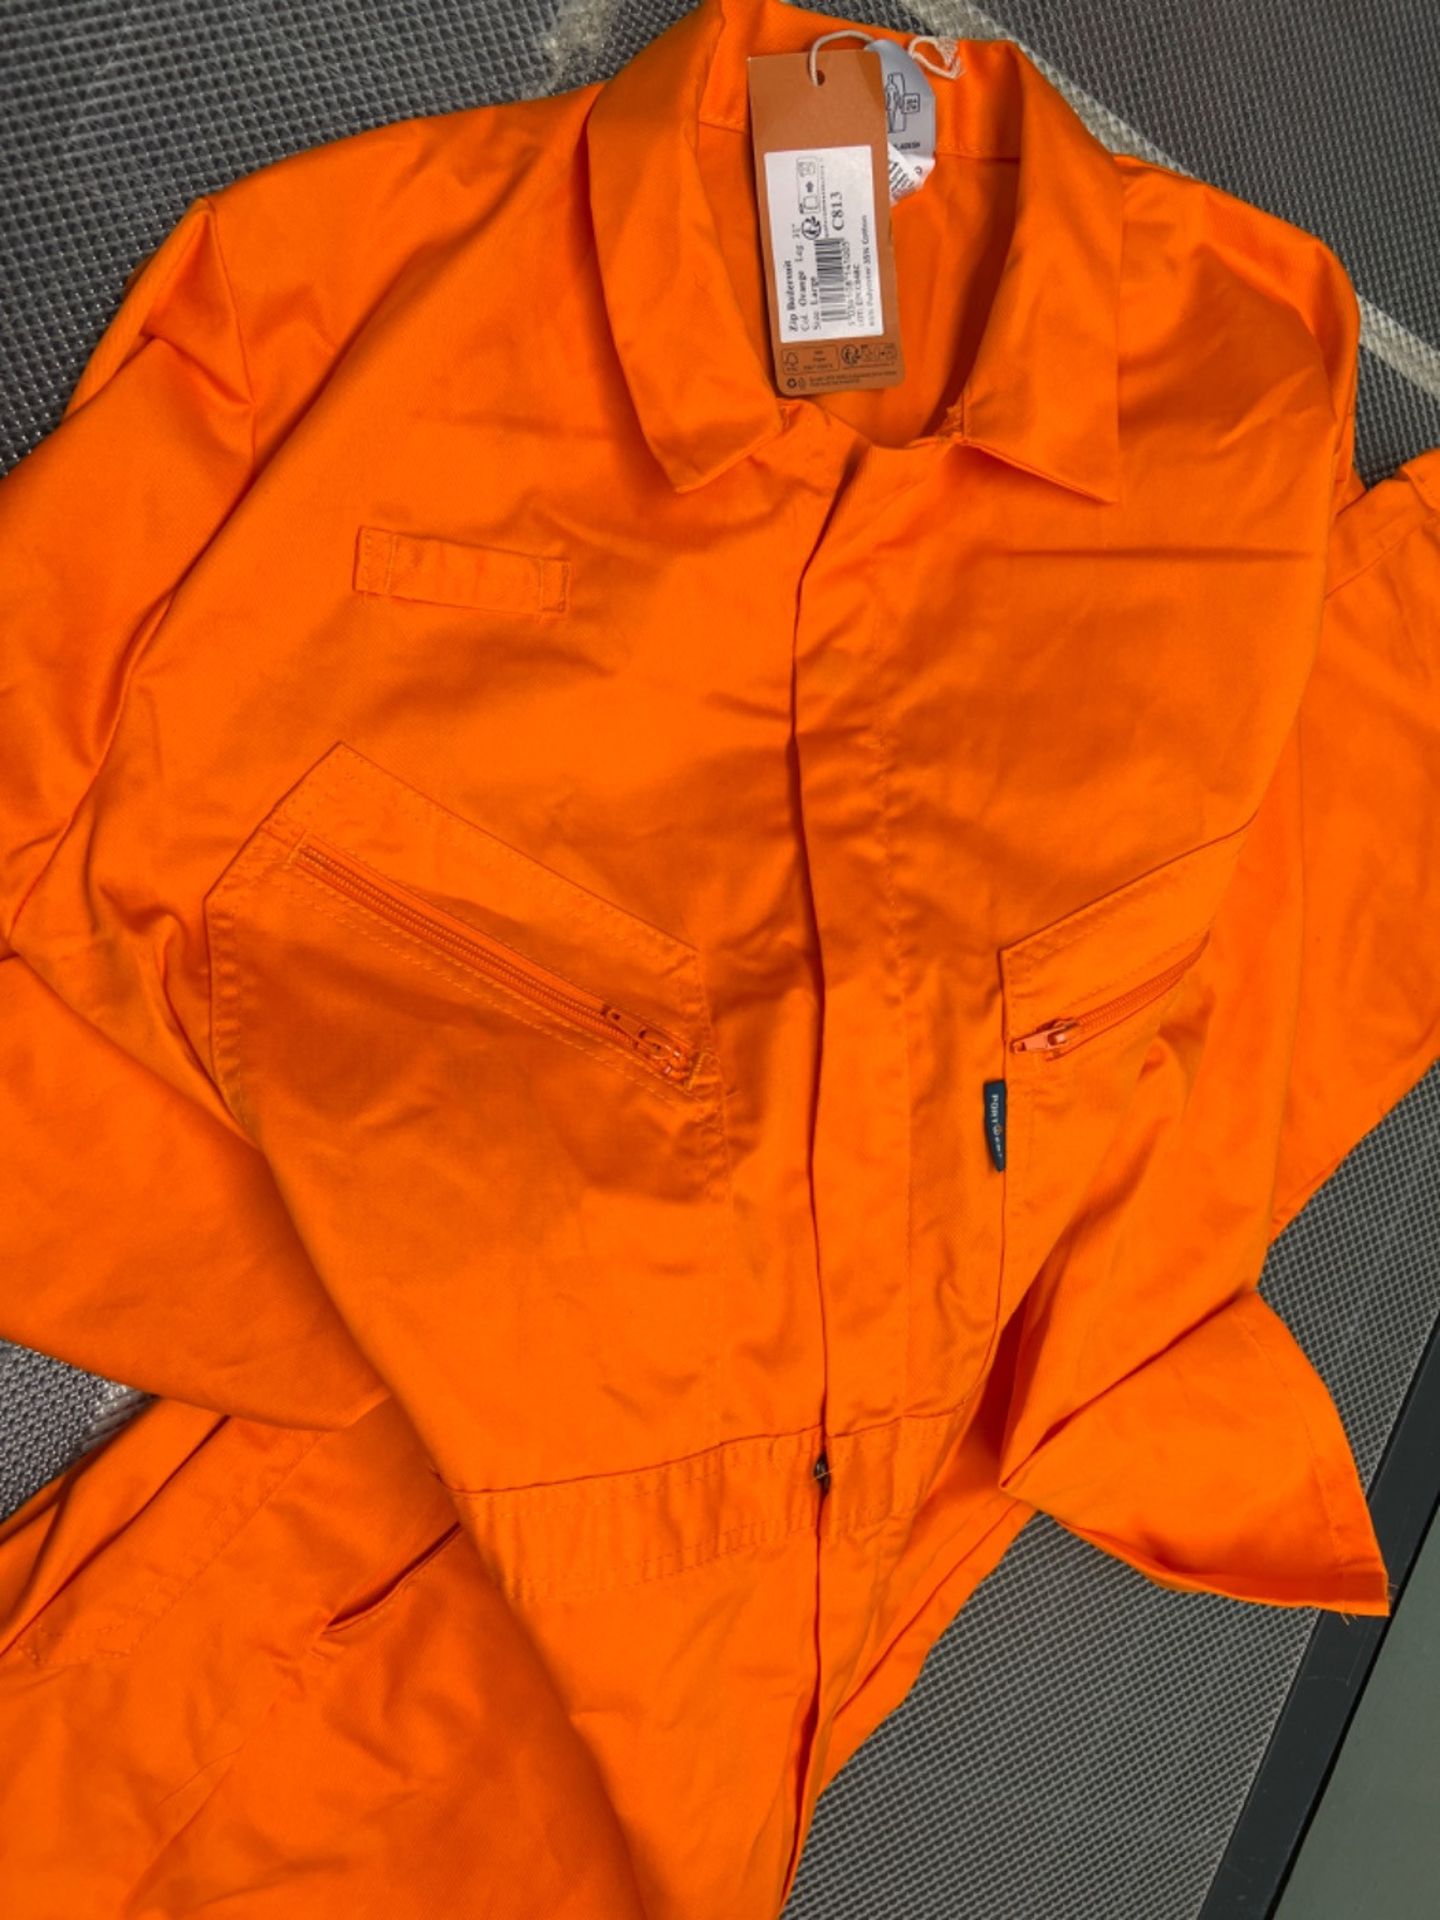 Portwest C813 Men's Liverpool Lightweight Safety Coverall Boiler Suit Overalls Orange, Large - Image 2 of 3